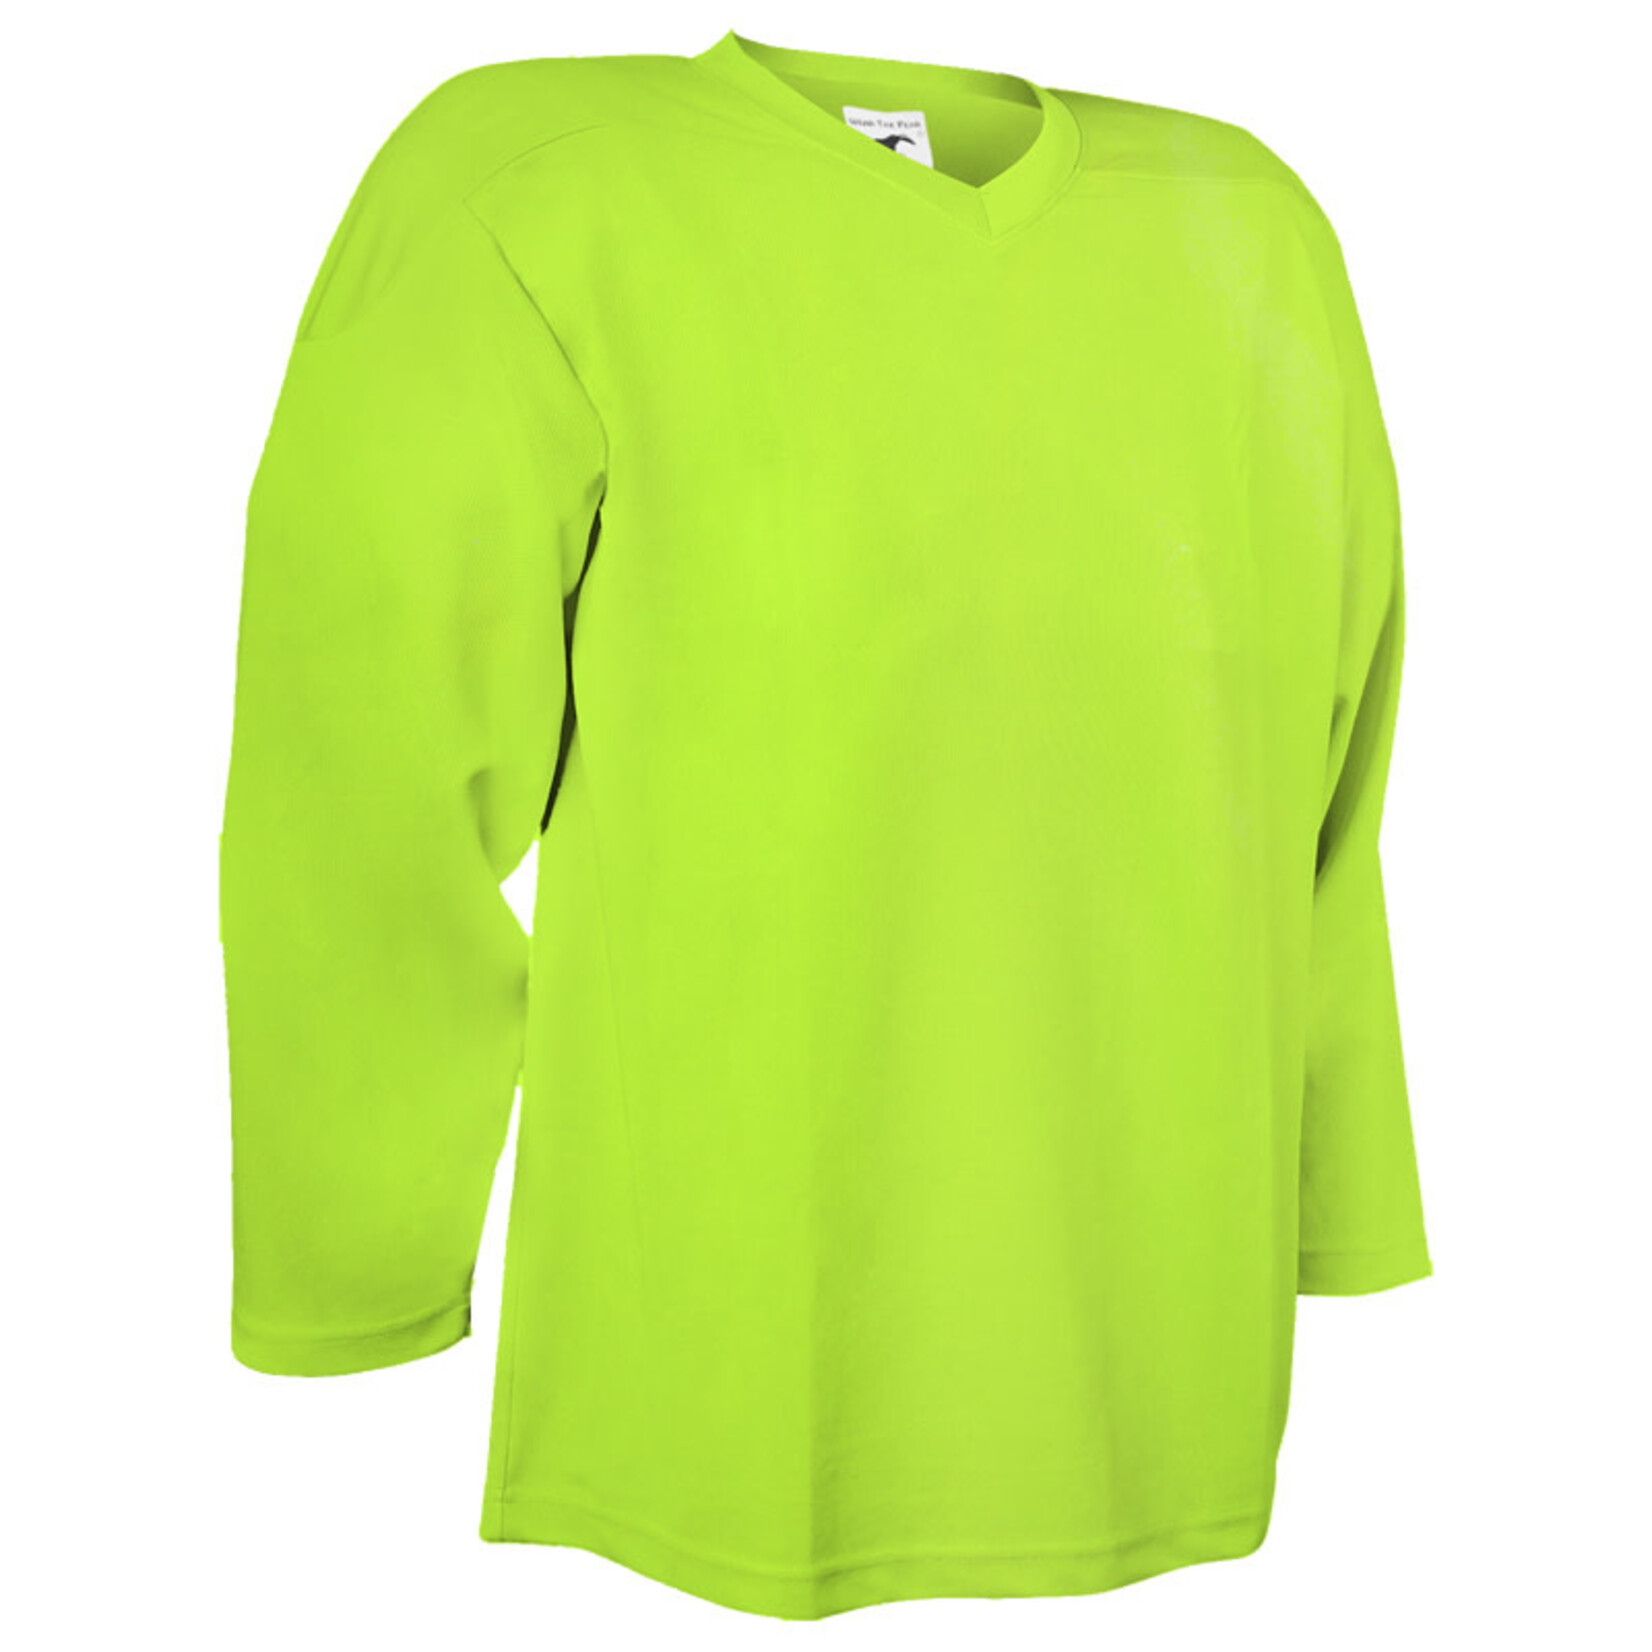 Pear Sox Pear Sox Air Mesh Practice Jersey (ADULT NEON YELLOW)